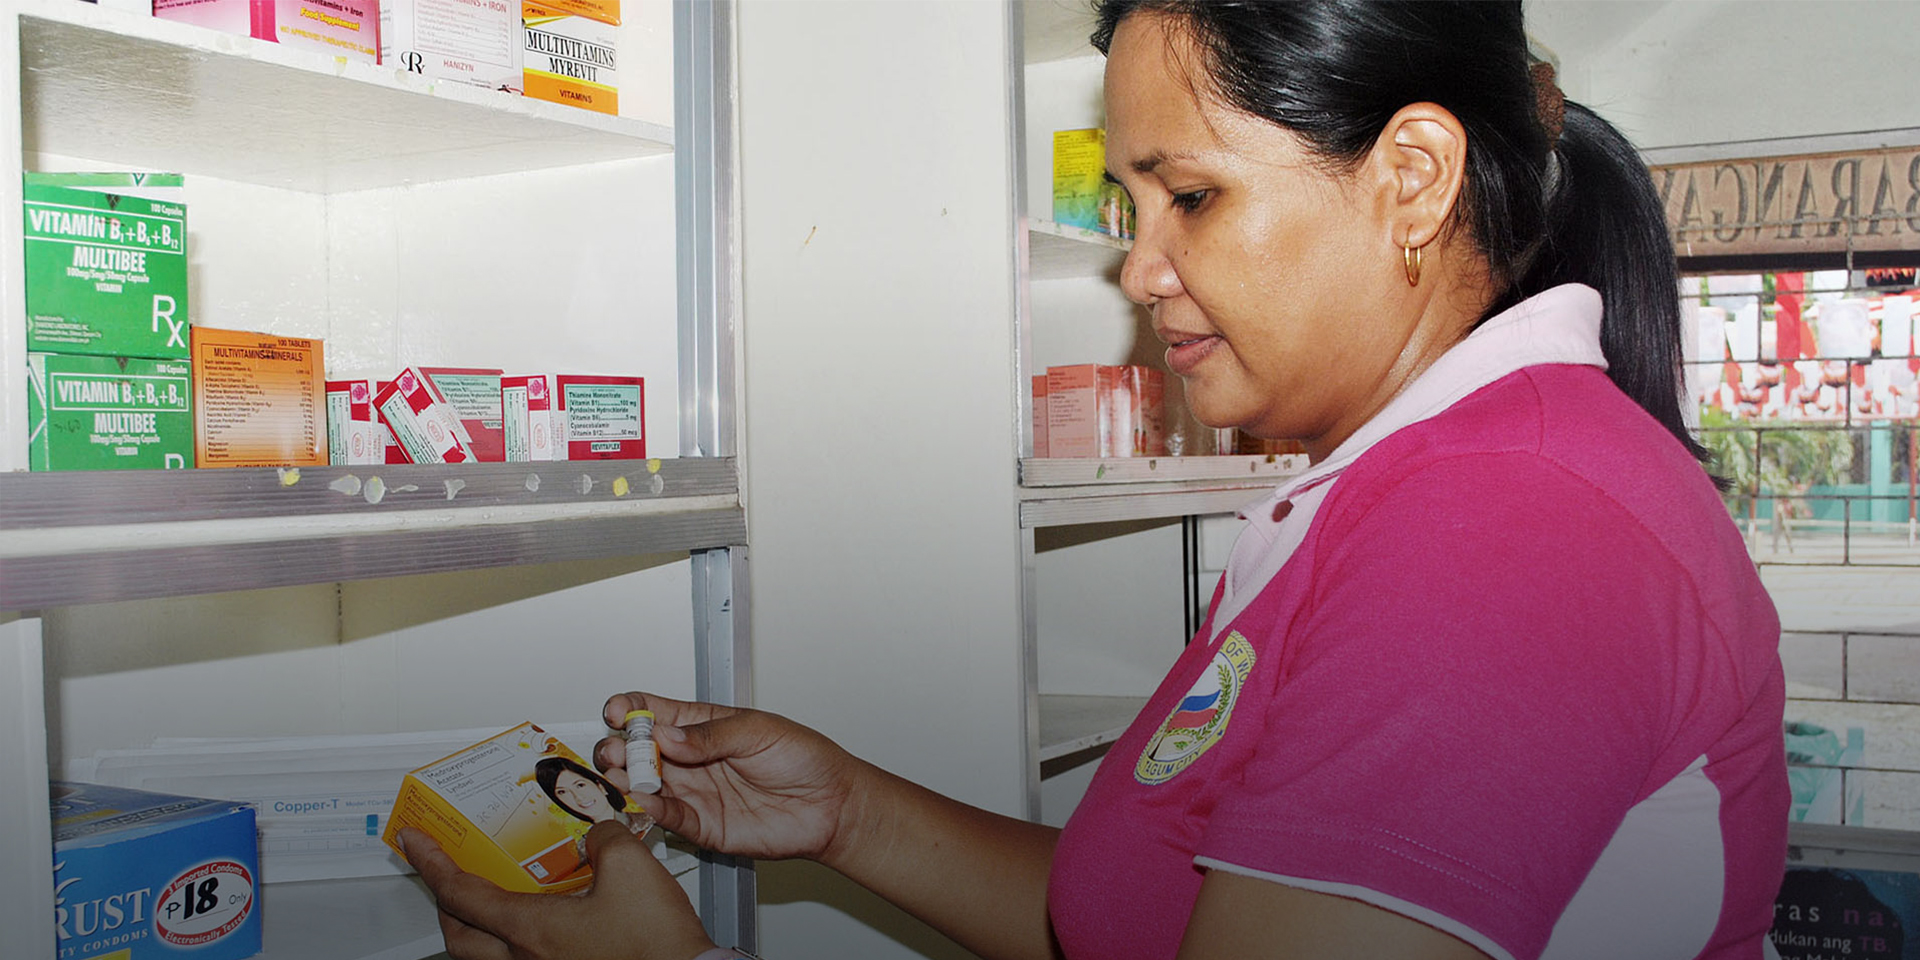 A woman holding and looking at a box of medication in a pharmacy.